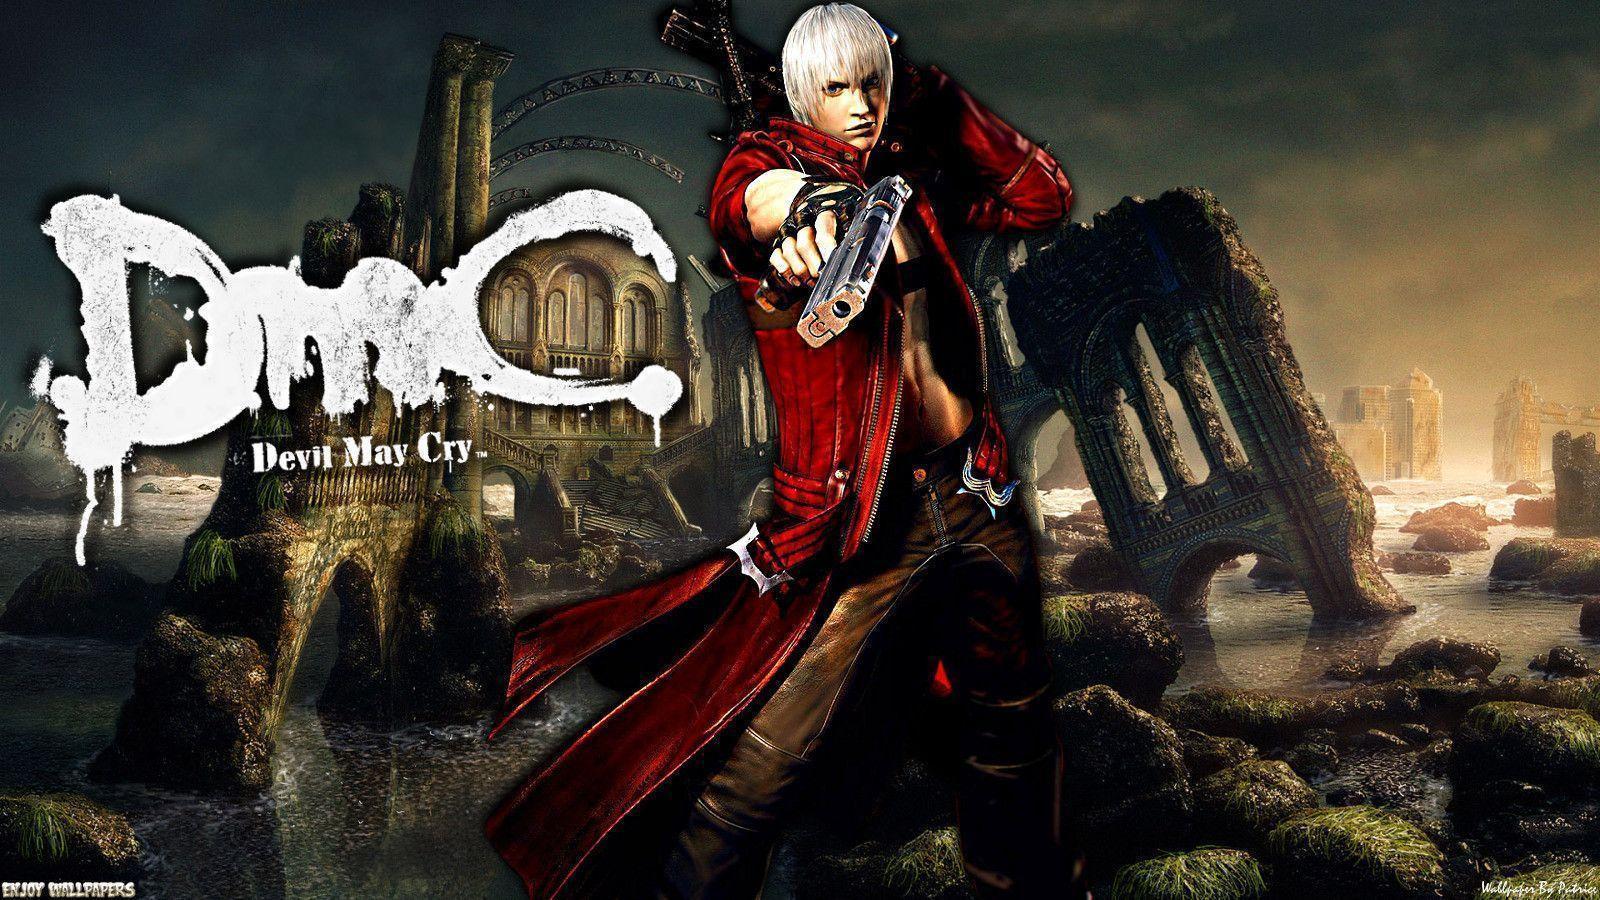 Wallpaper For > Devil May Cry 1 Wallpaper